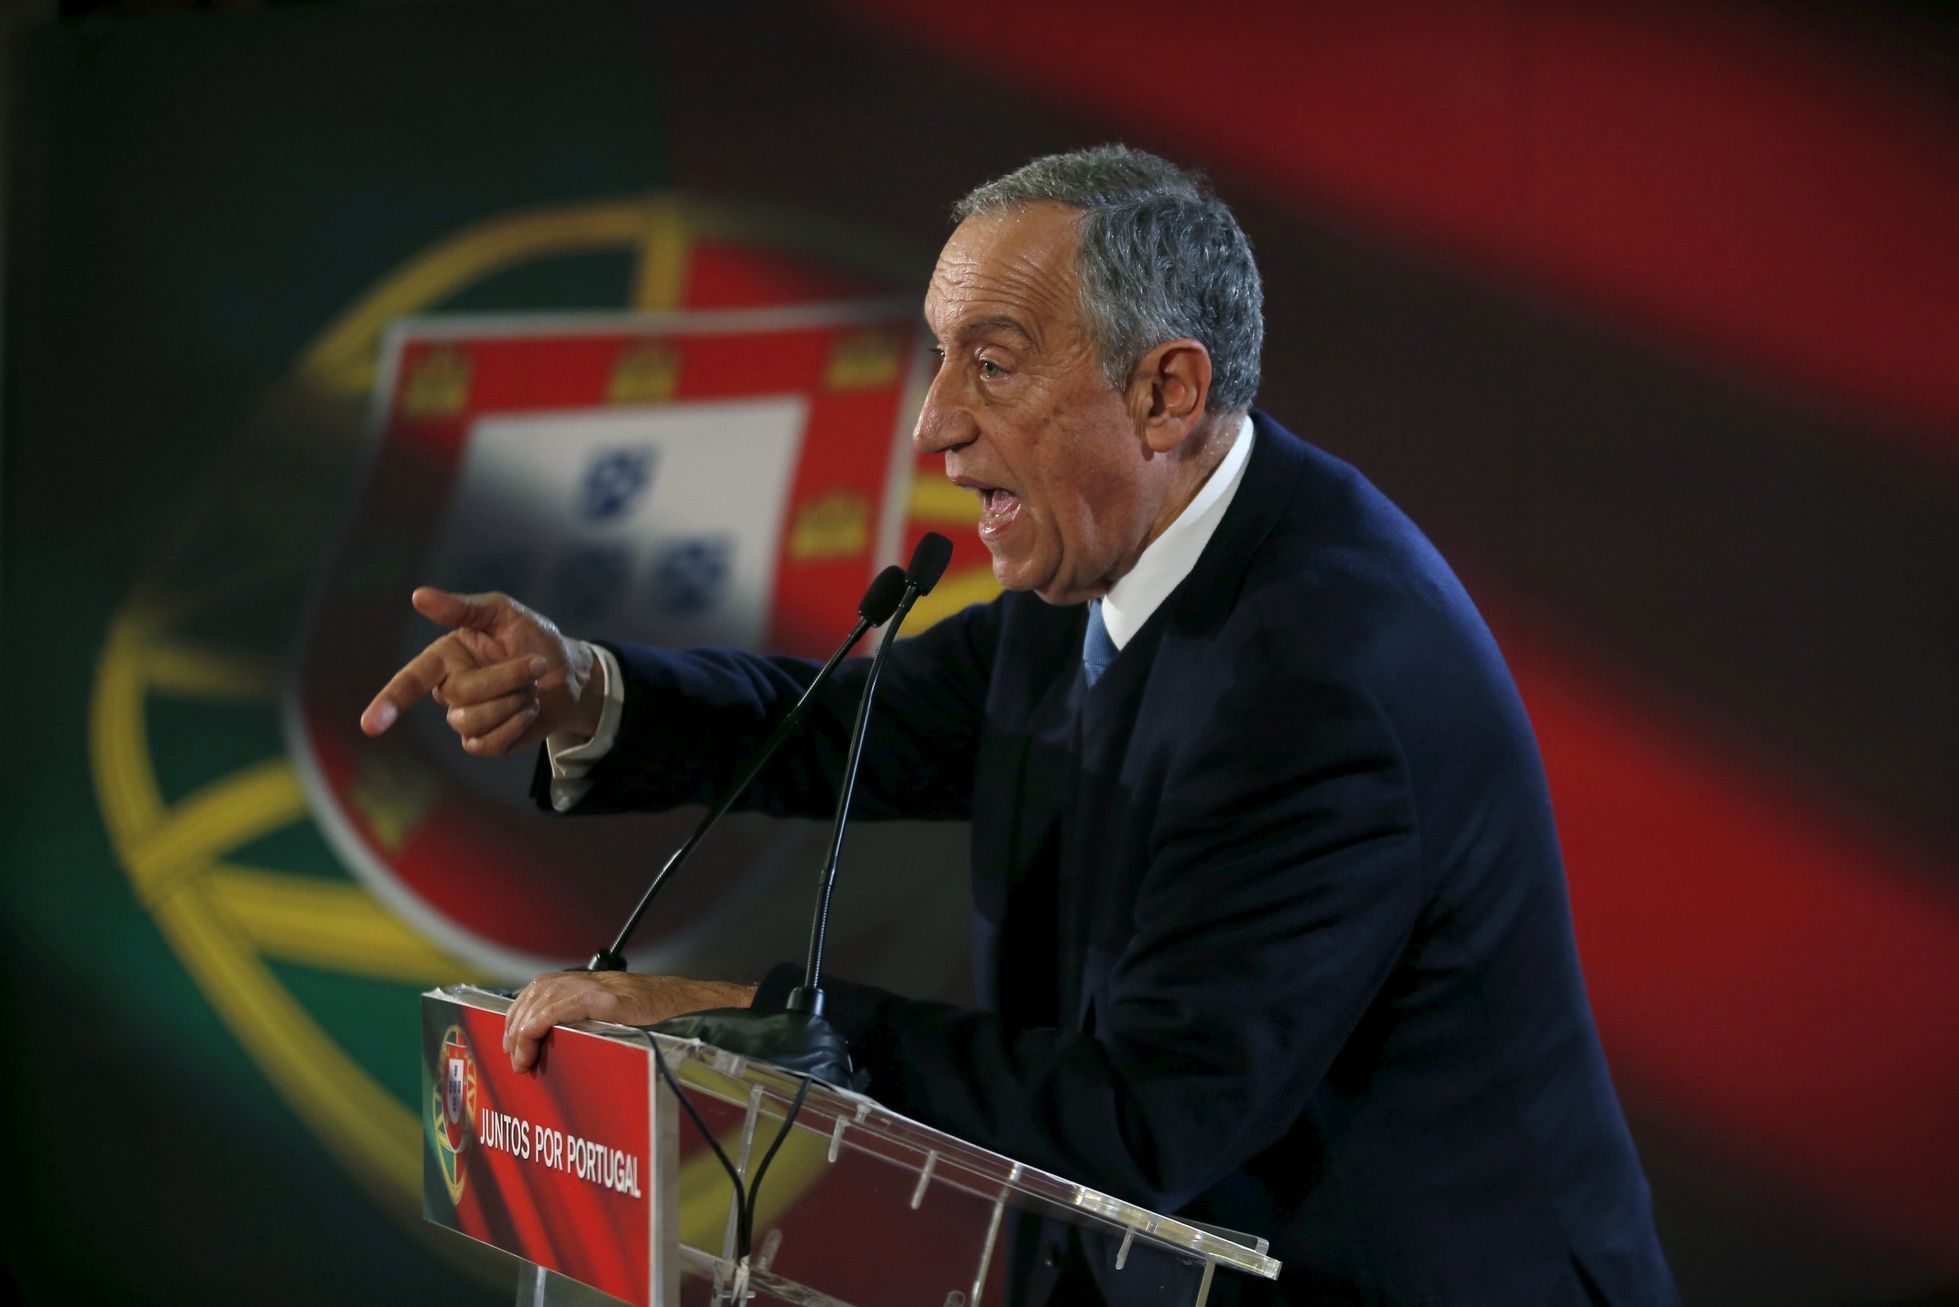 Portugal's presidential candidate Marcelo Rebelo de Sousa attends an election campaign event in Lourinha